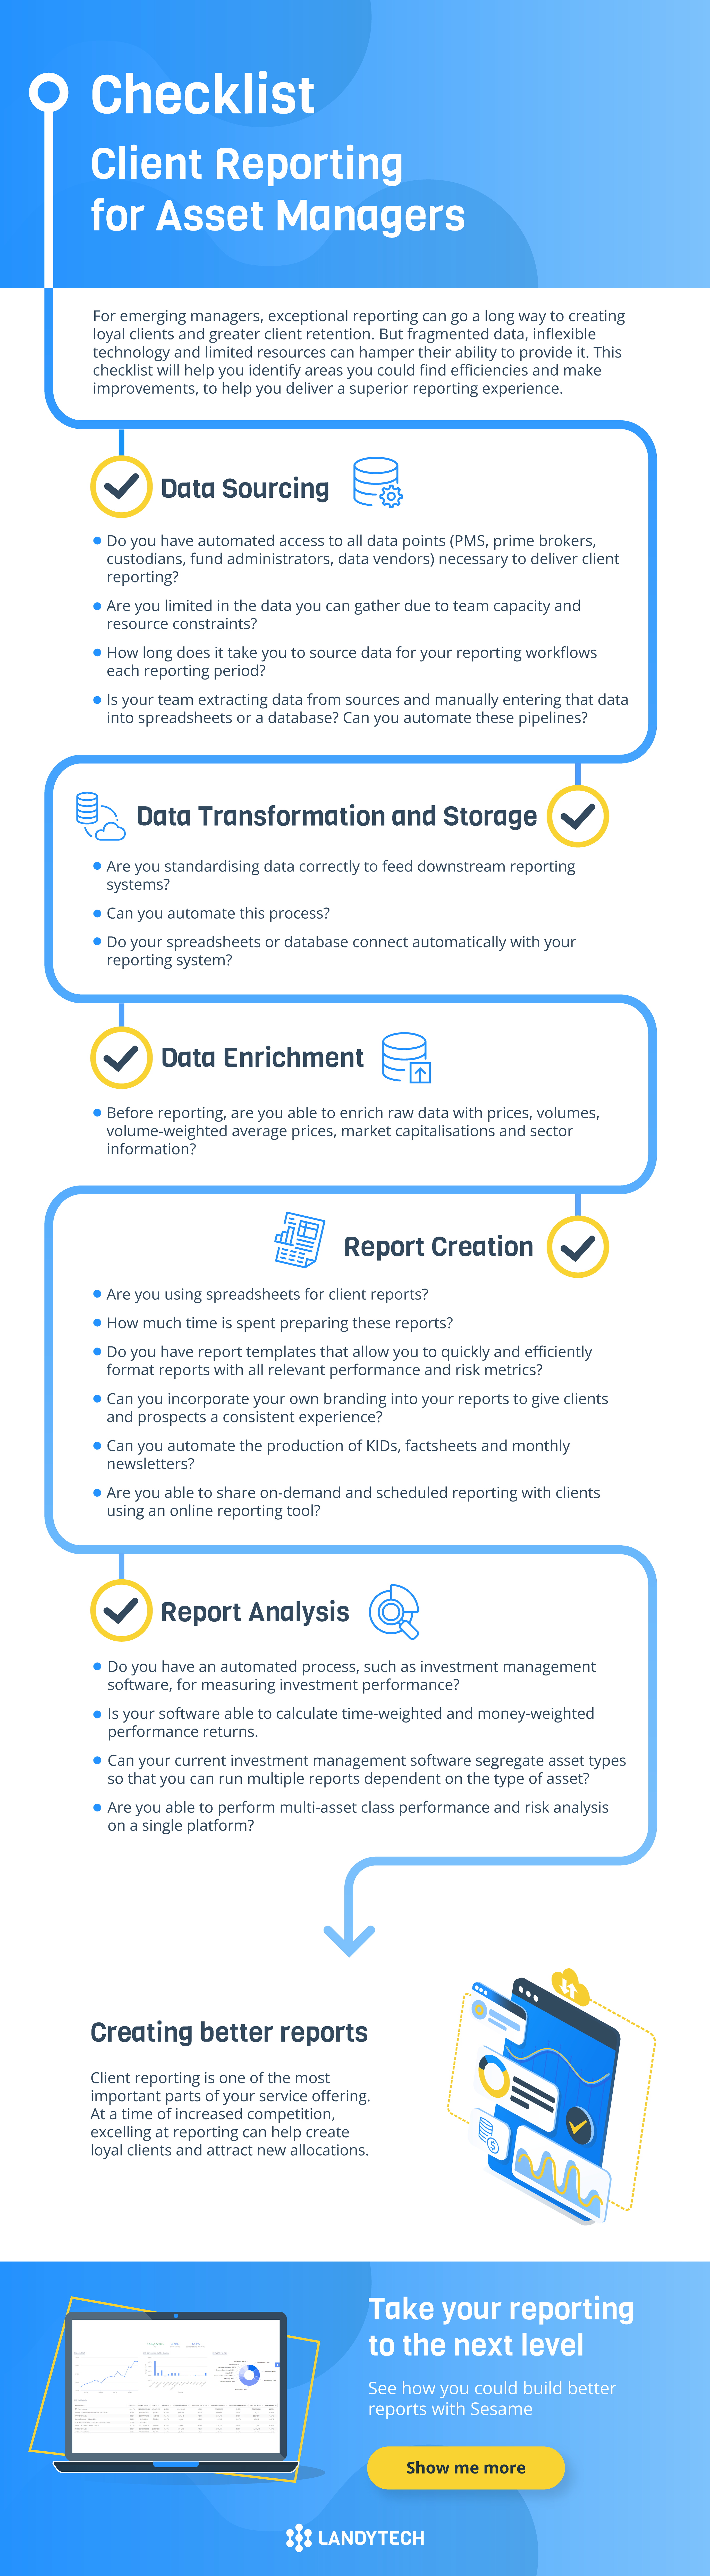 Client Reporting Checklist infographic_v02